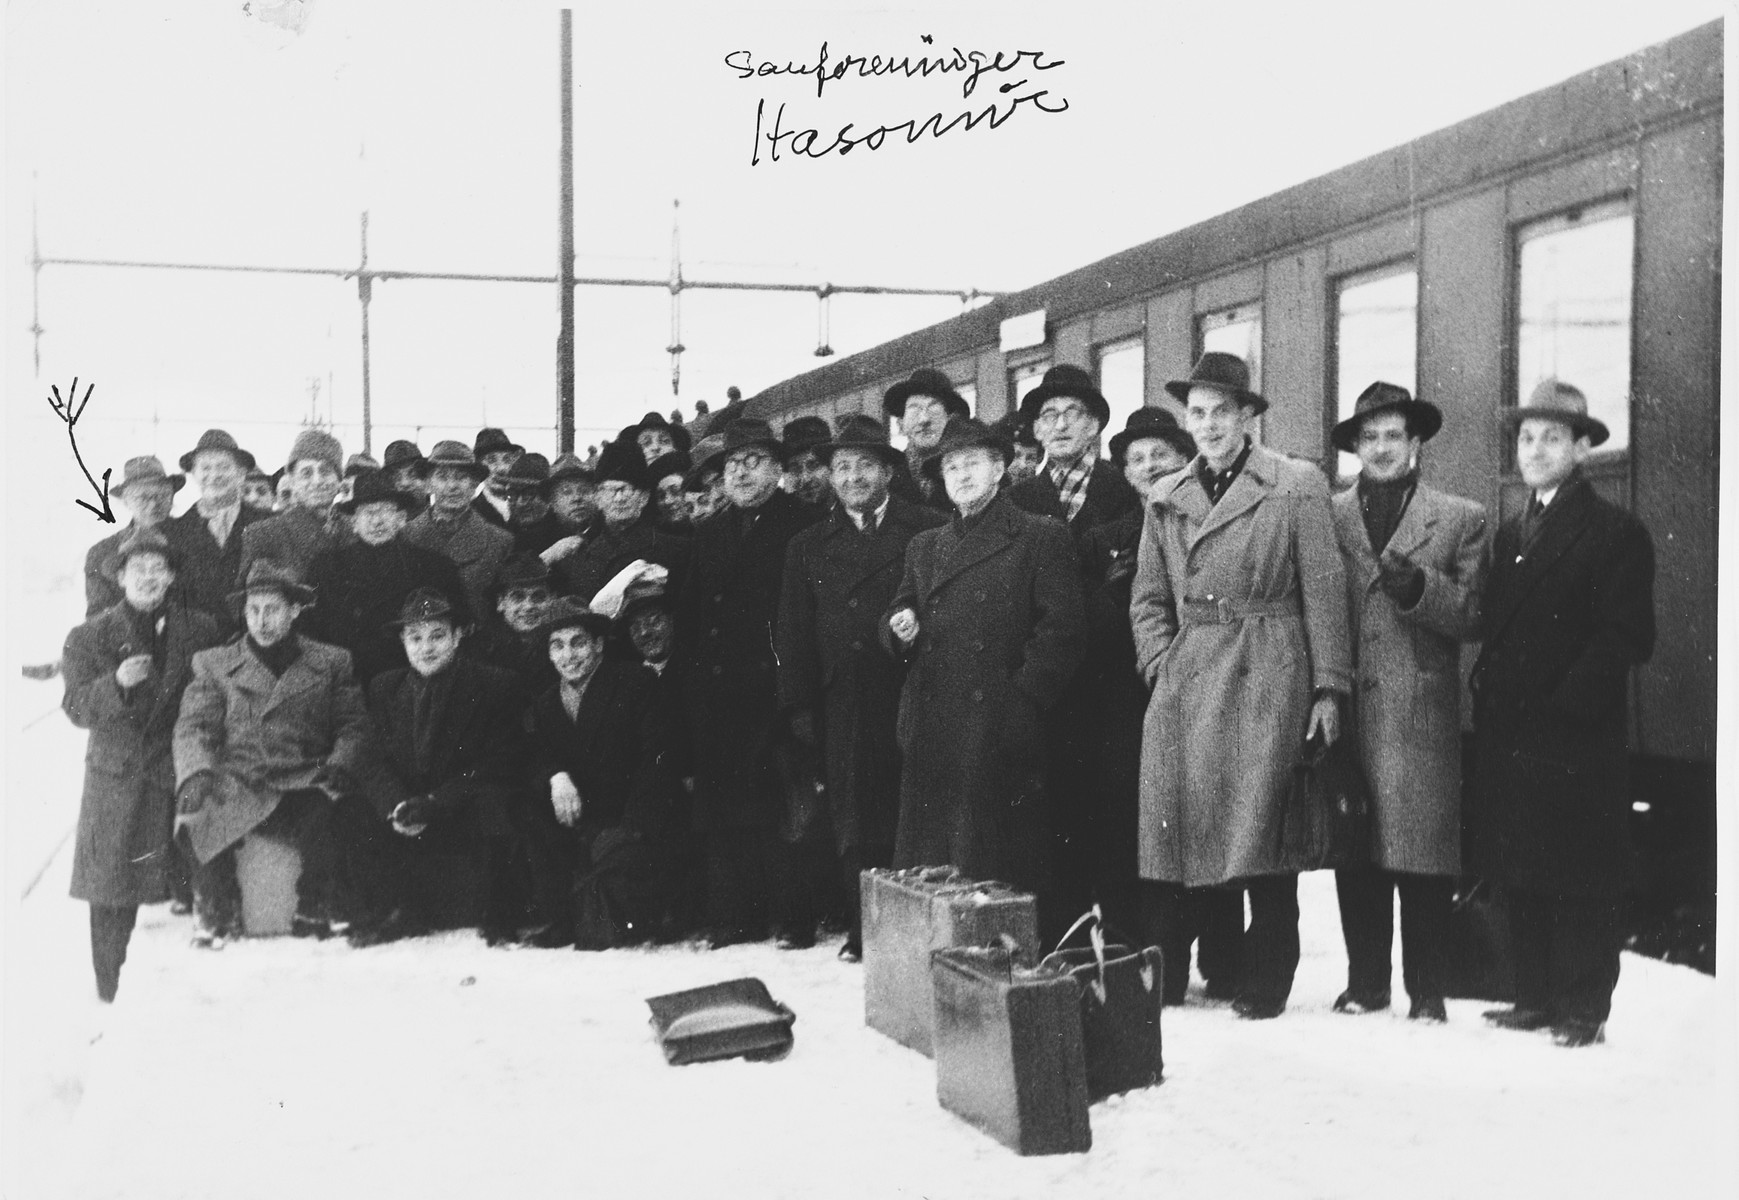 Group portrait of members of the Hasomir Jewish choir at the Hovedbanegarden train station in Copenhagen.

Among those pictured is Bernhard Diament (second from the left).